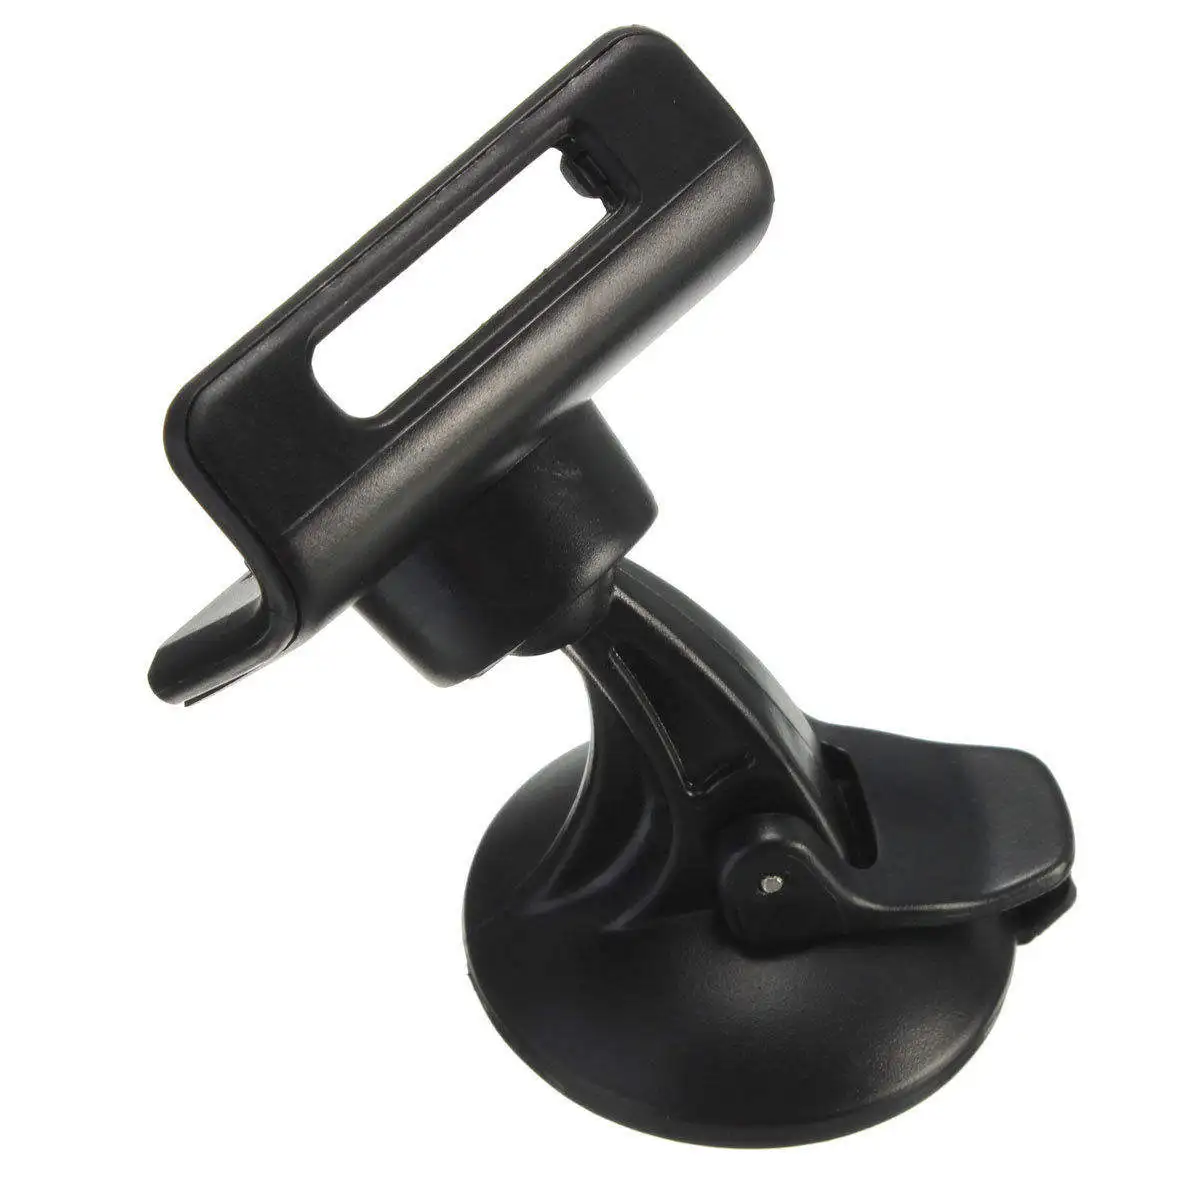 Generic Auto Windscreen Mount Suction Holder for TomTom GO 1000 1005 2050 2505 2435